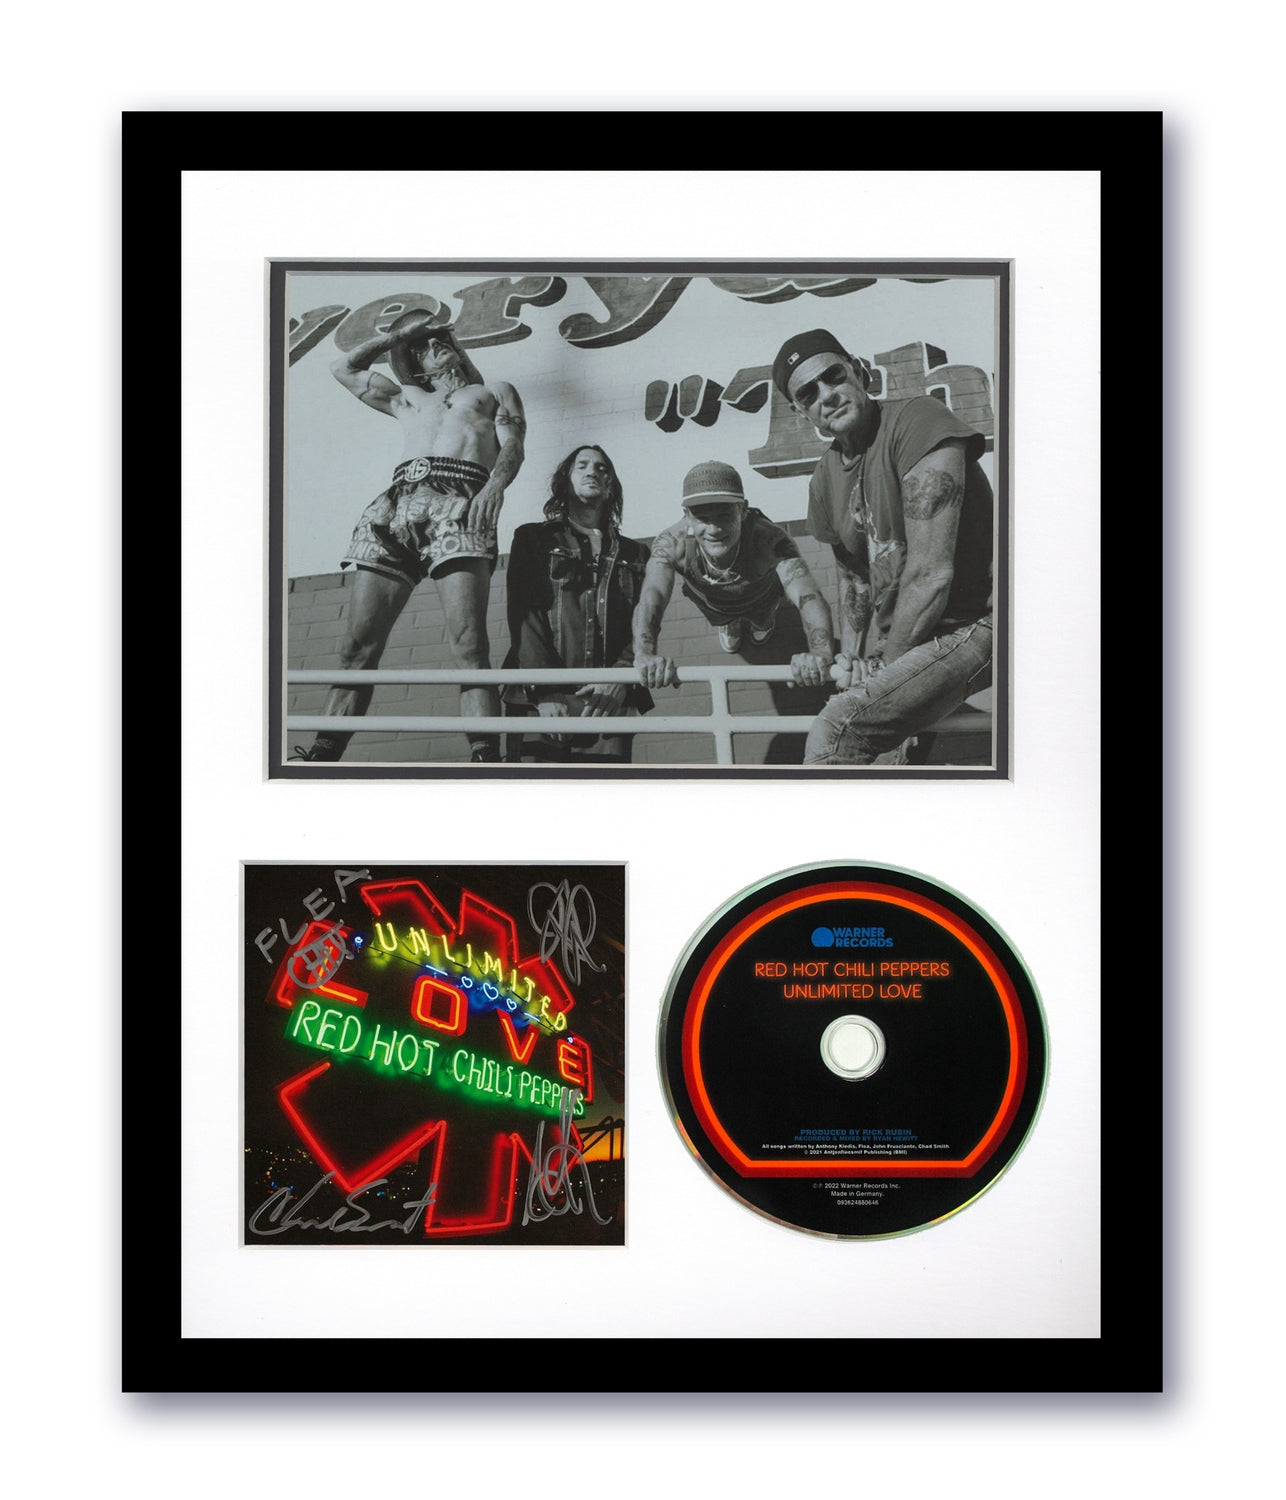 Red Hot Chili Peppers Signed 11x14 Framed CD Unlimited Love Autographed ACOA 3